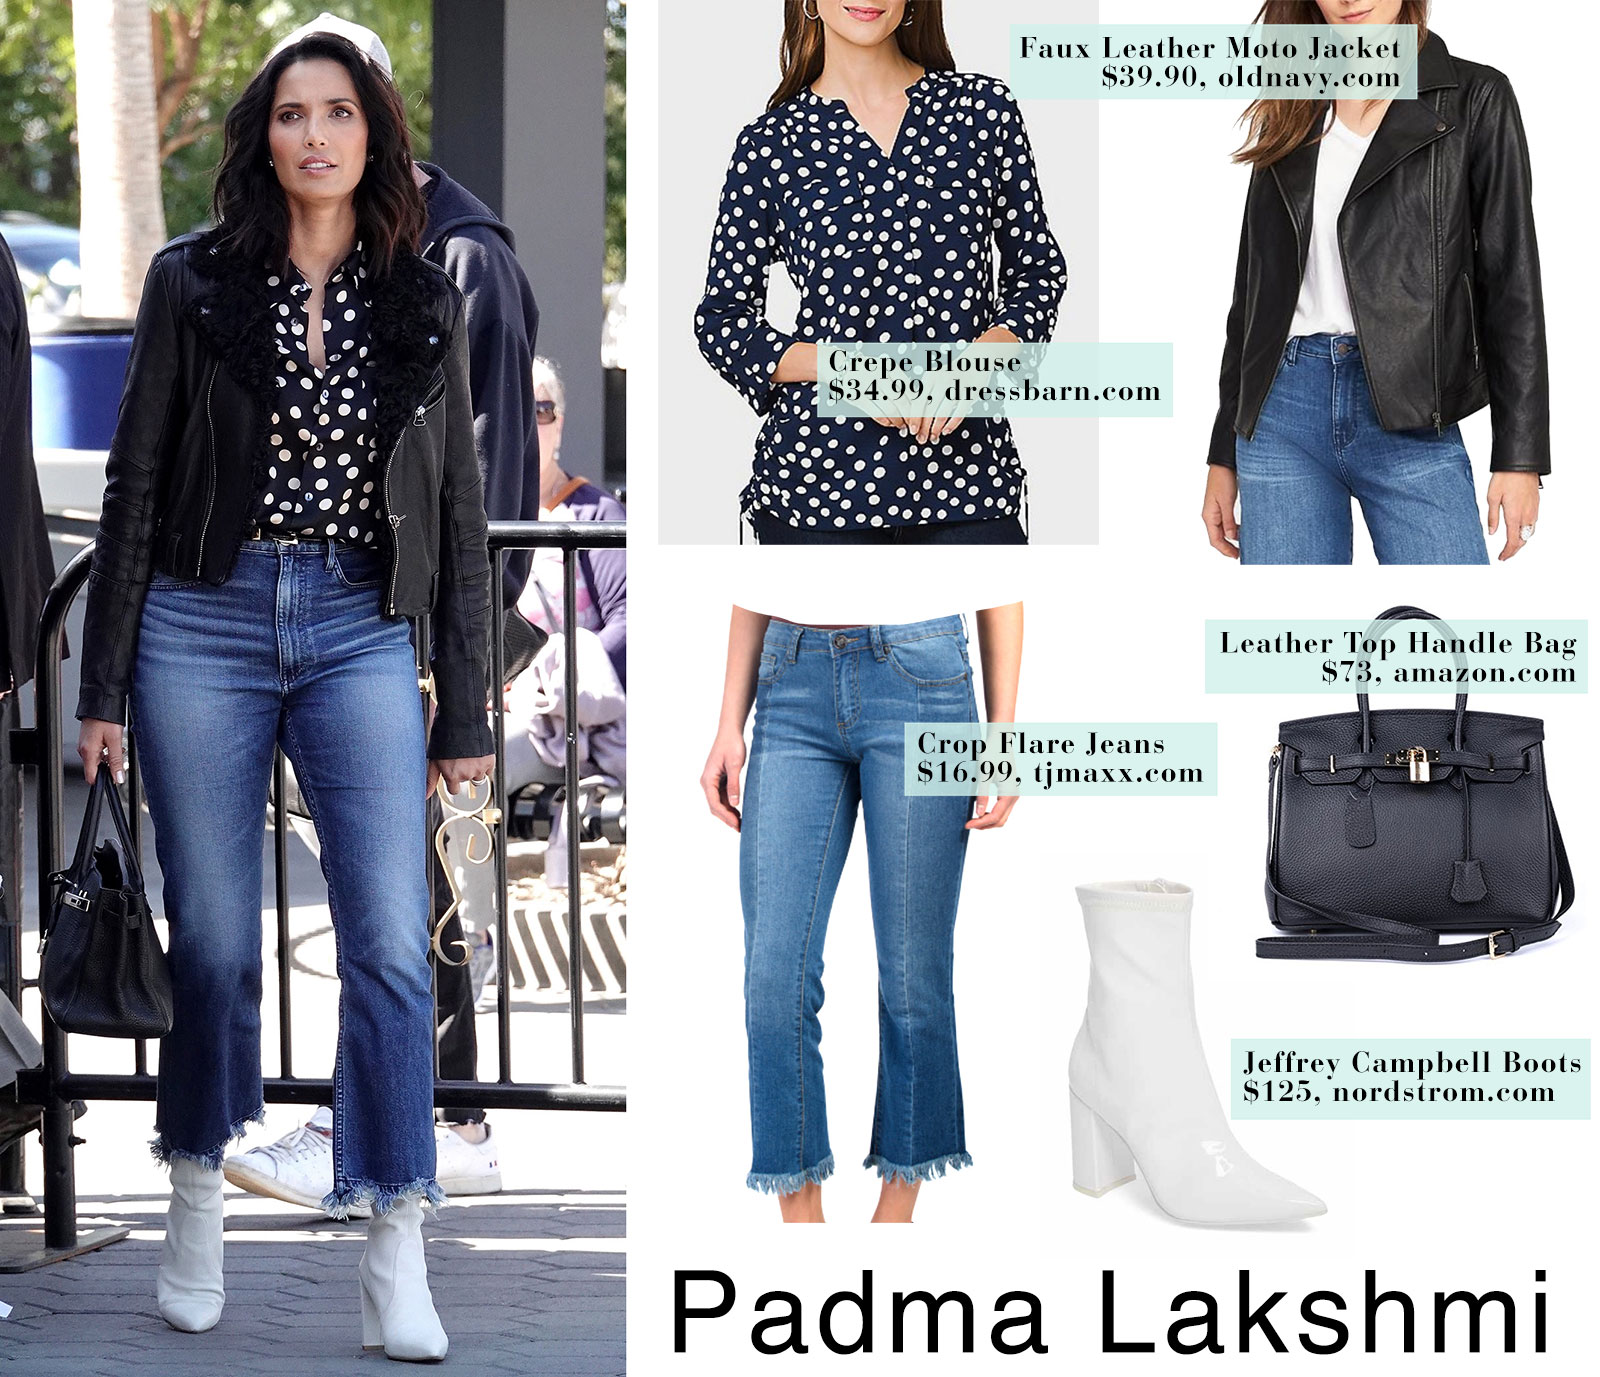 Padma Lakshmi's polka dot blouse and white ankle boots look for less